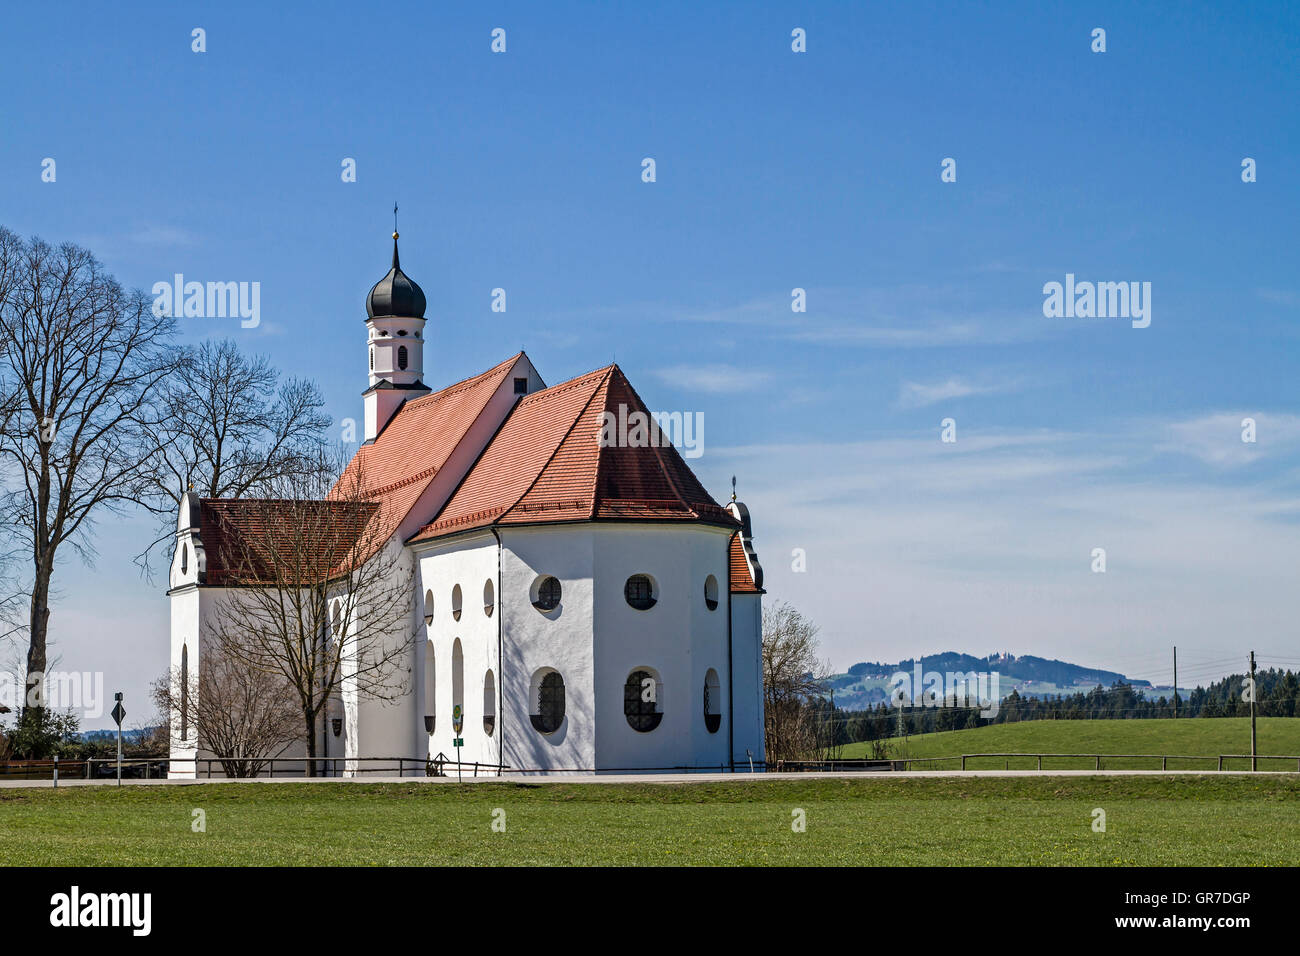 The Pilgrimage Church Of The Visitation In Ilgen Is One Of The Jewels In The Church Rich Pfaff Angle Stock Photo